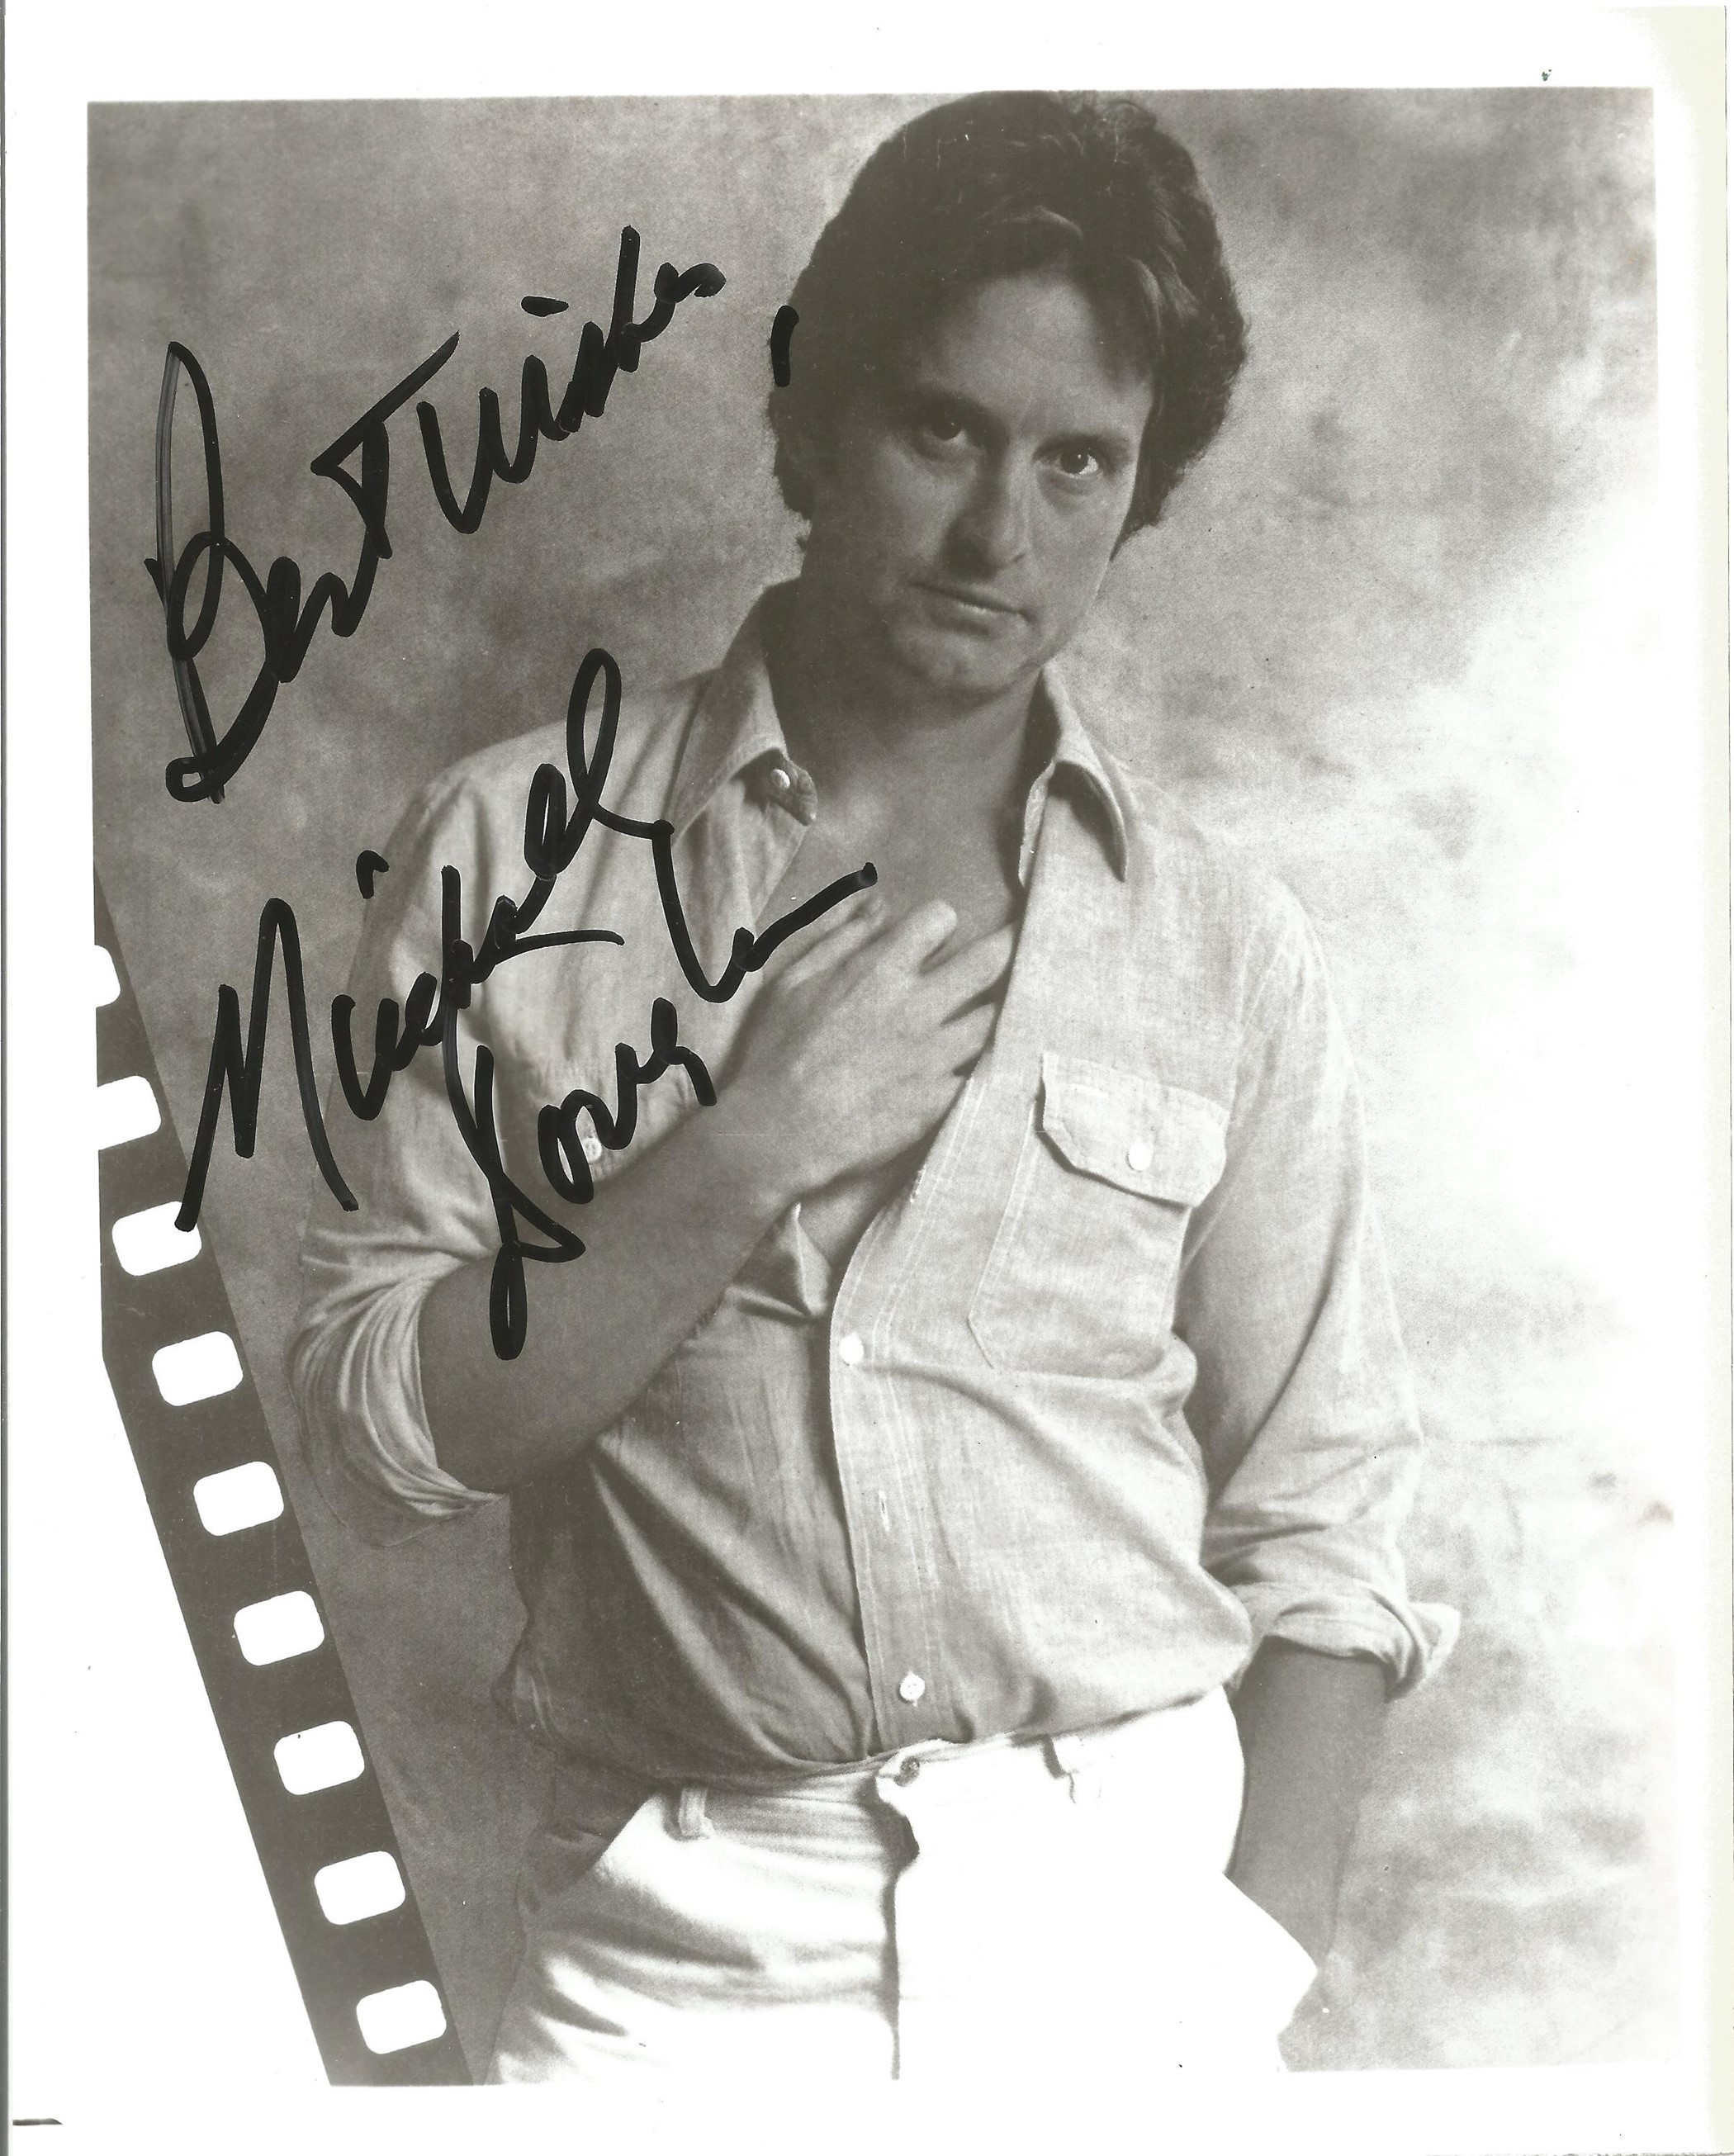 Michael Douglas signed 10 x 8 inch black and white photo. Douglas is an American actor and